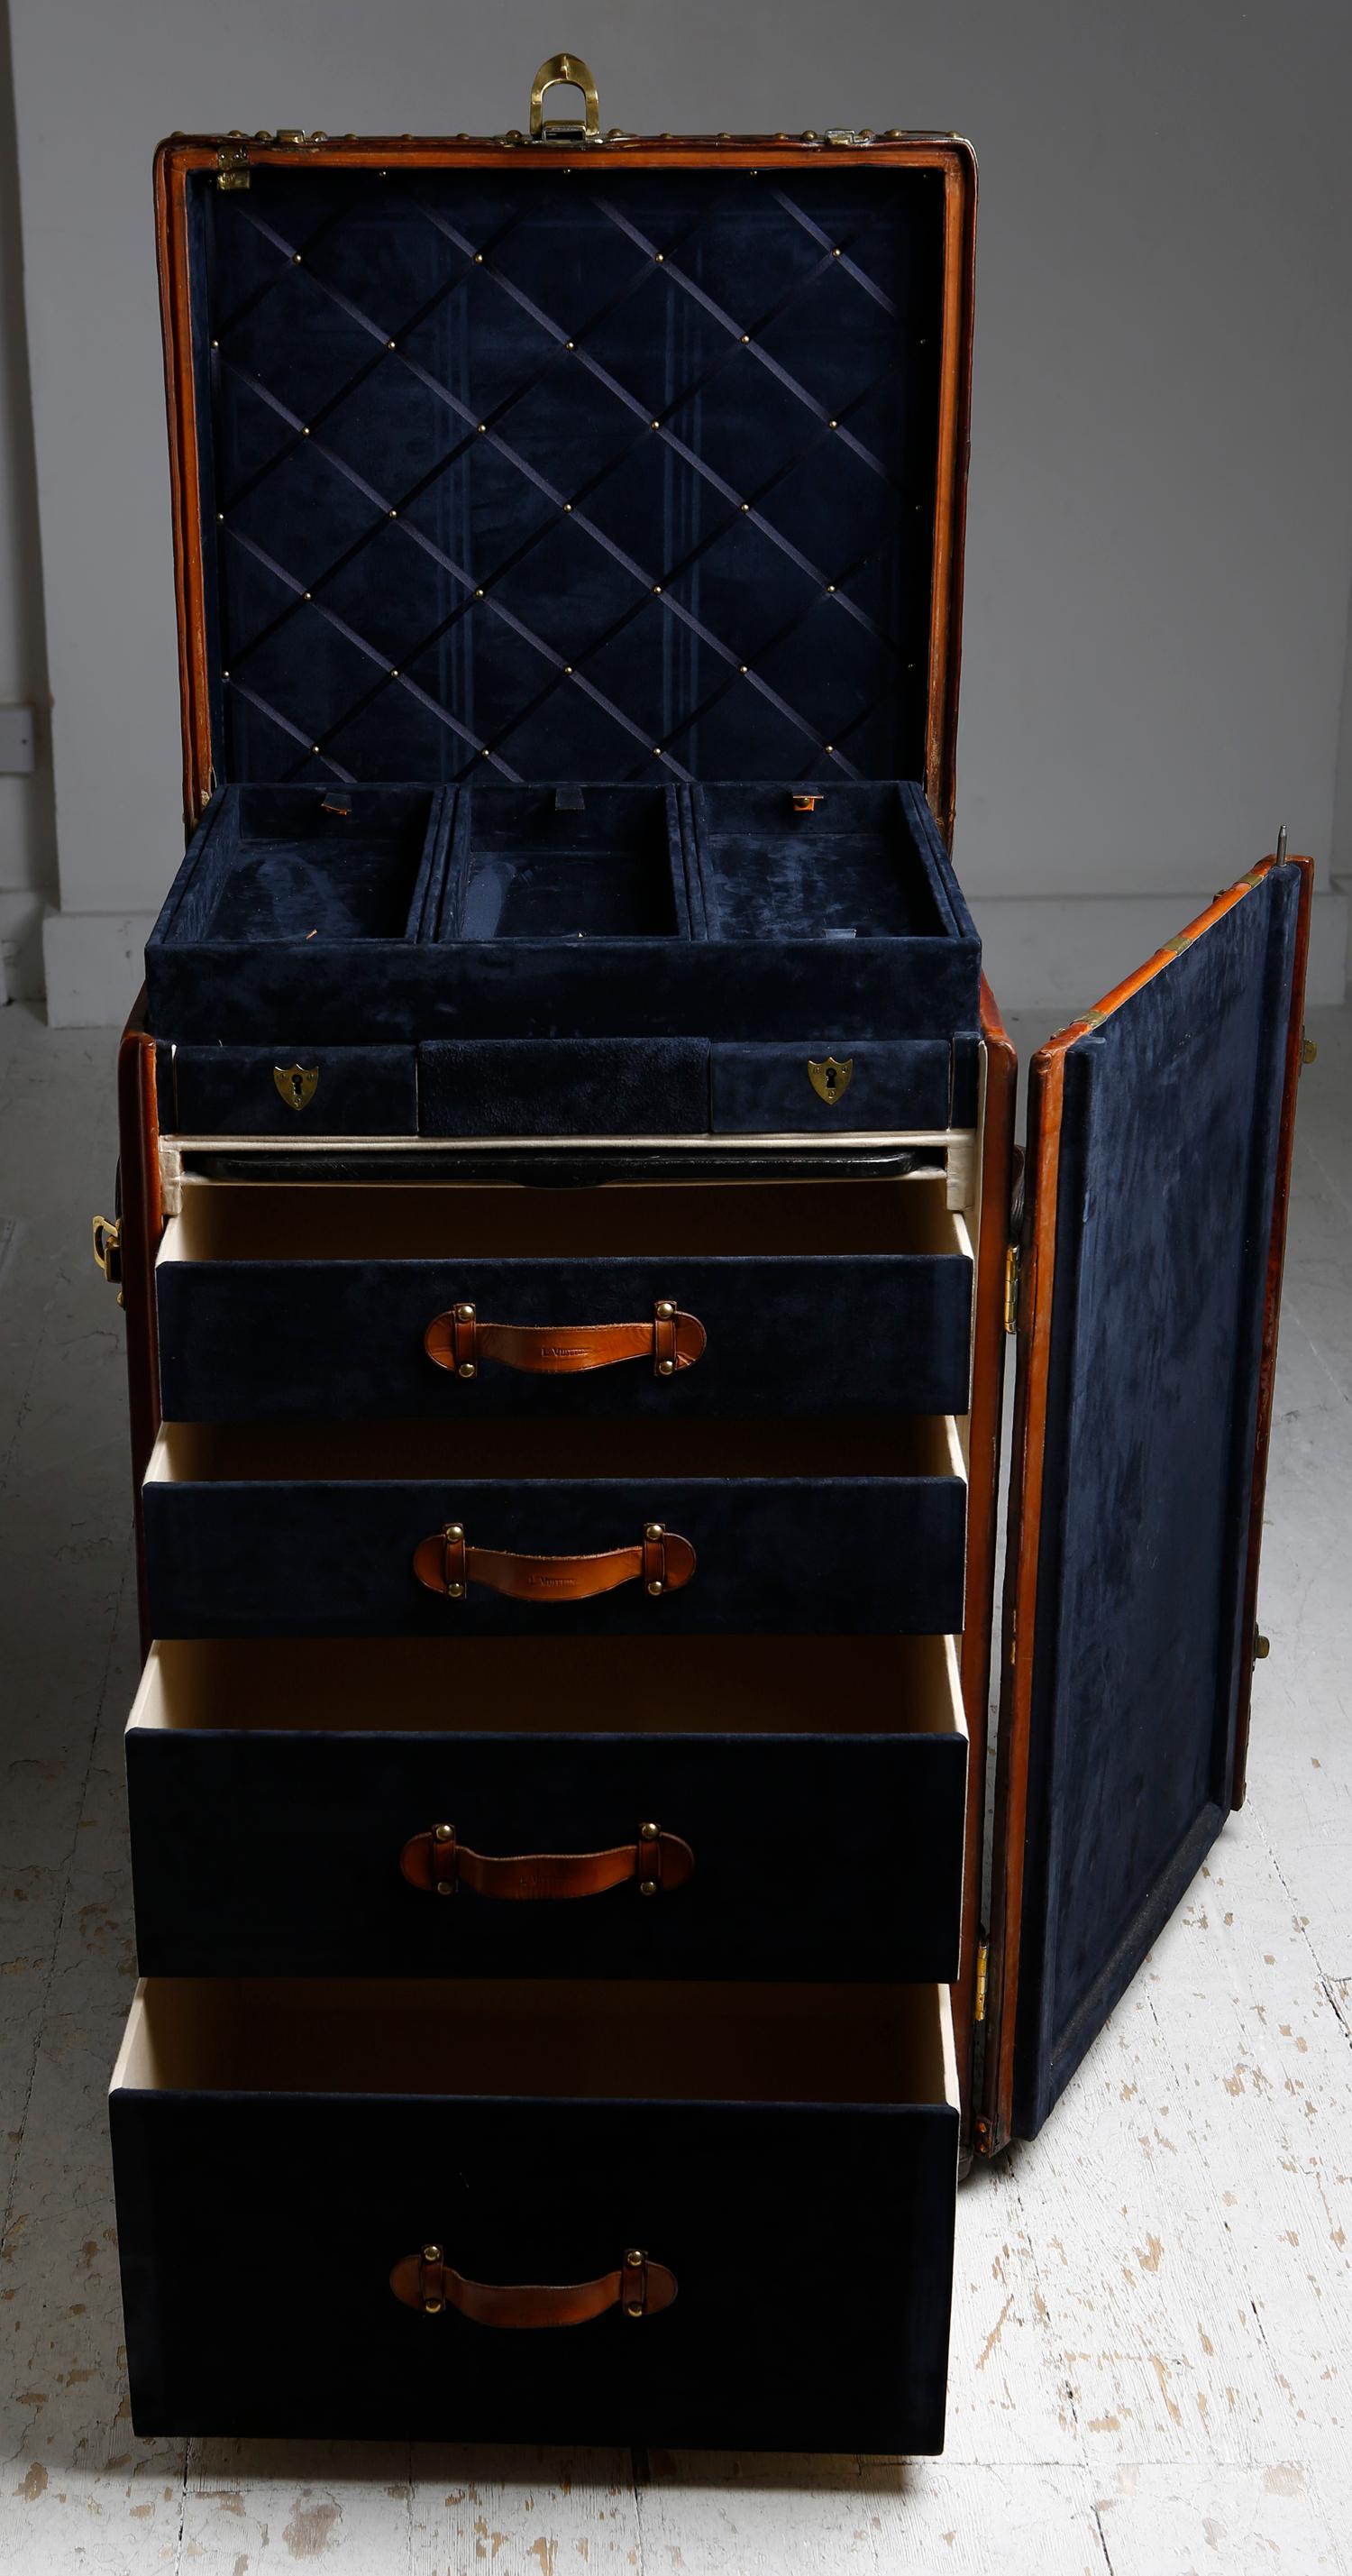 Louis Vuitton Ladies Lingerie Desk Trunk in Orange with Mahogany Finish, 1914 For Sale 8